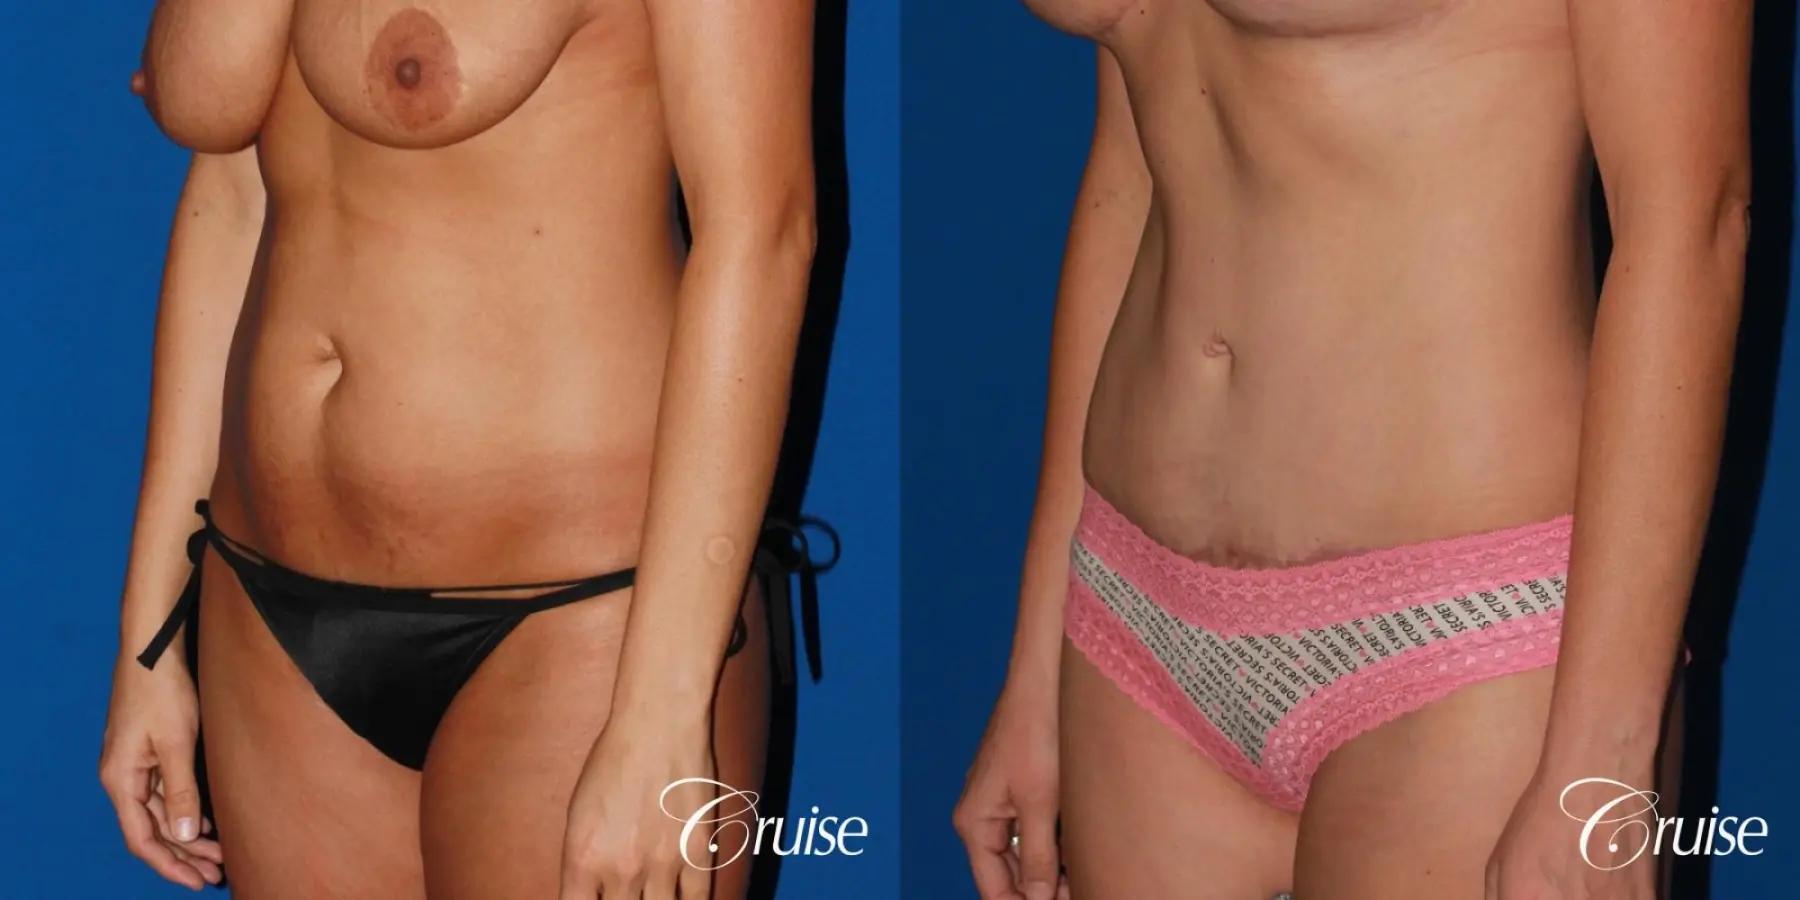 Standard Tummy Tuck & Liposuction: 35 Yr Old Female - Before and After 3